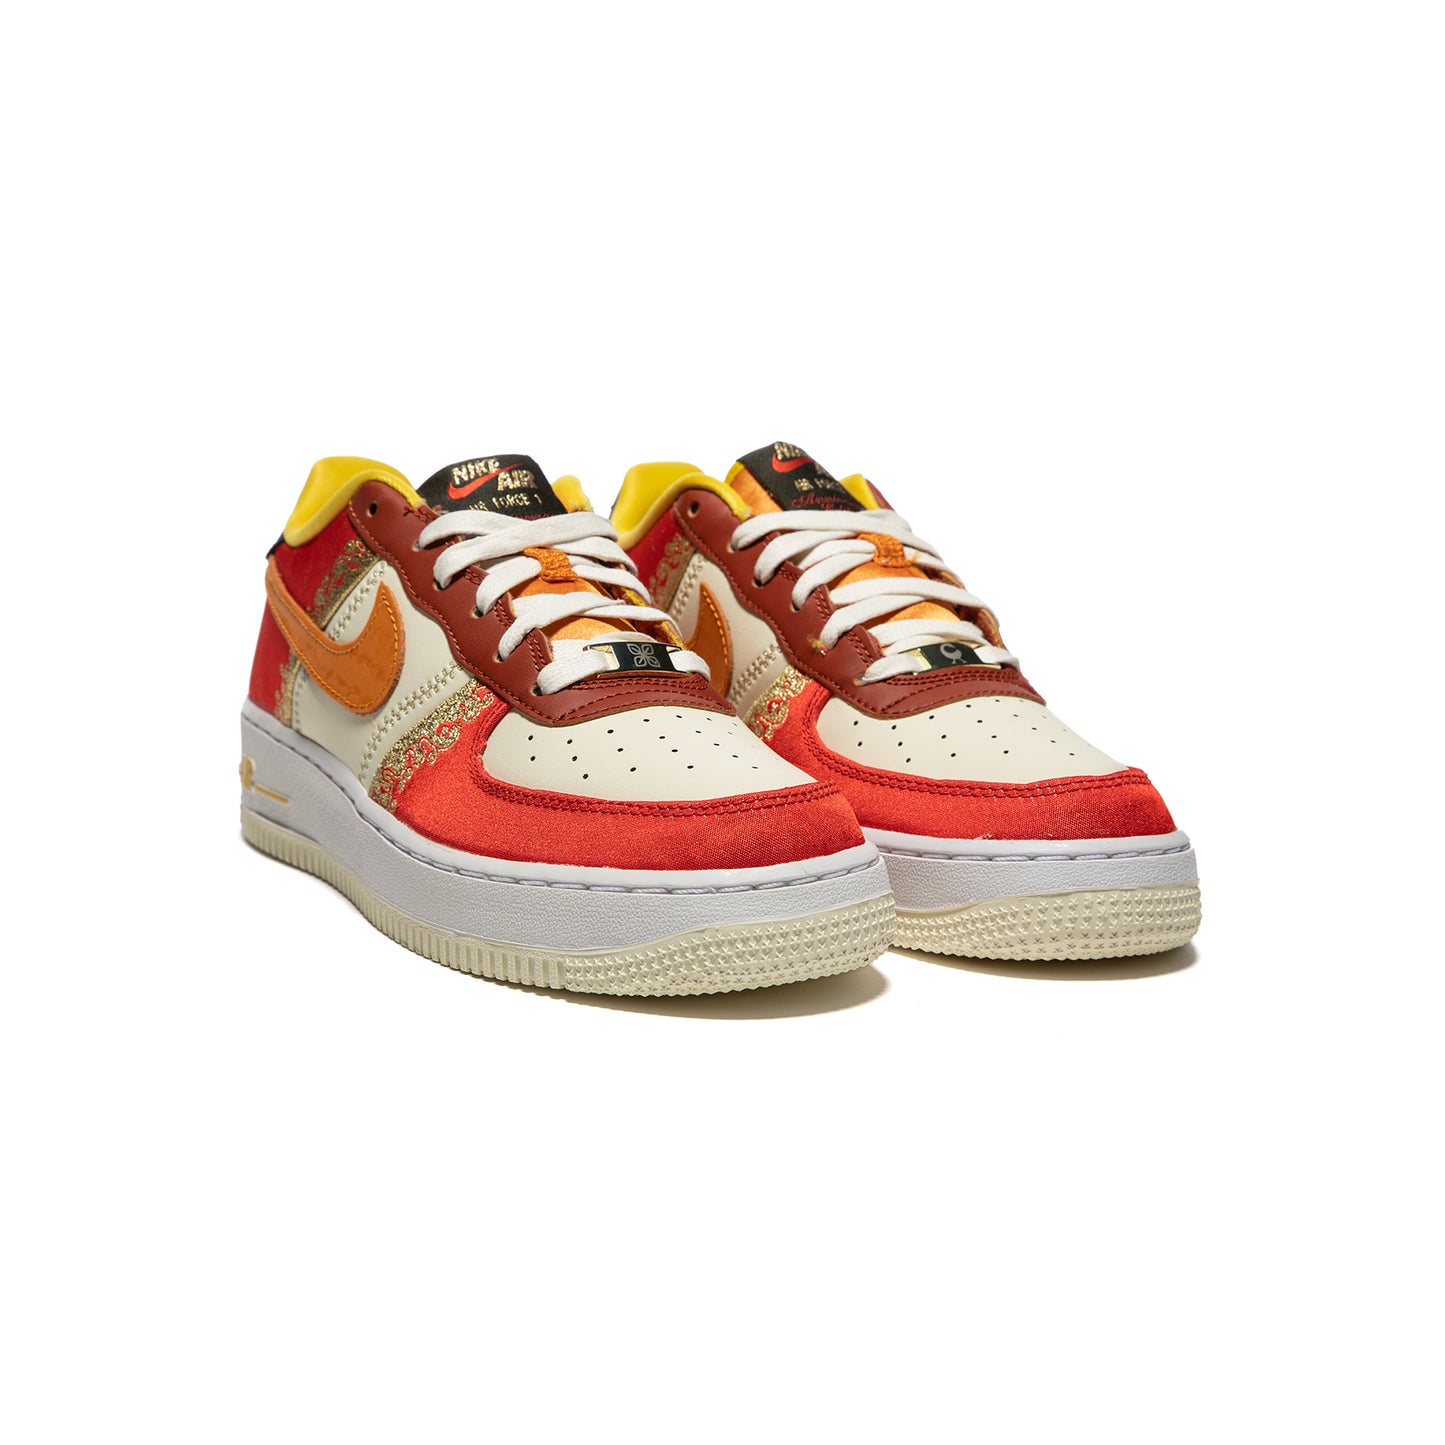 Nike Kids Air Force 1 PRM (Habanero Red/Light Curry/Coconut Milk)